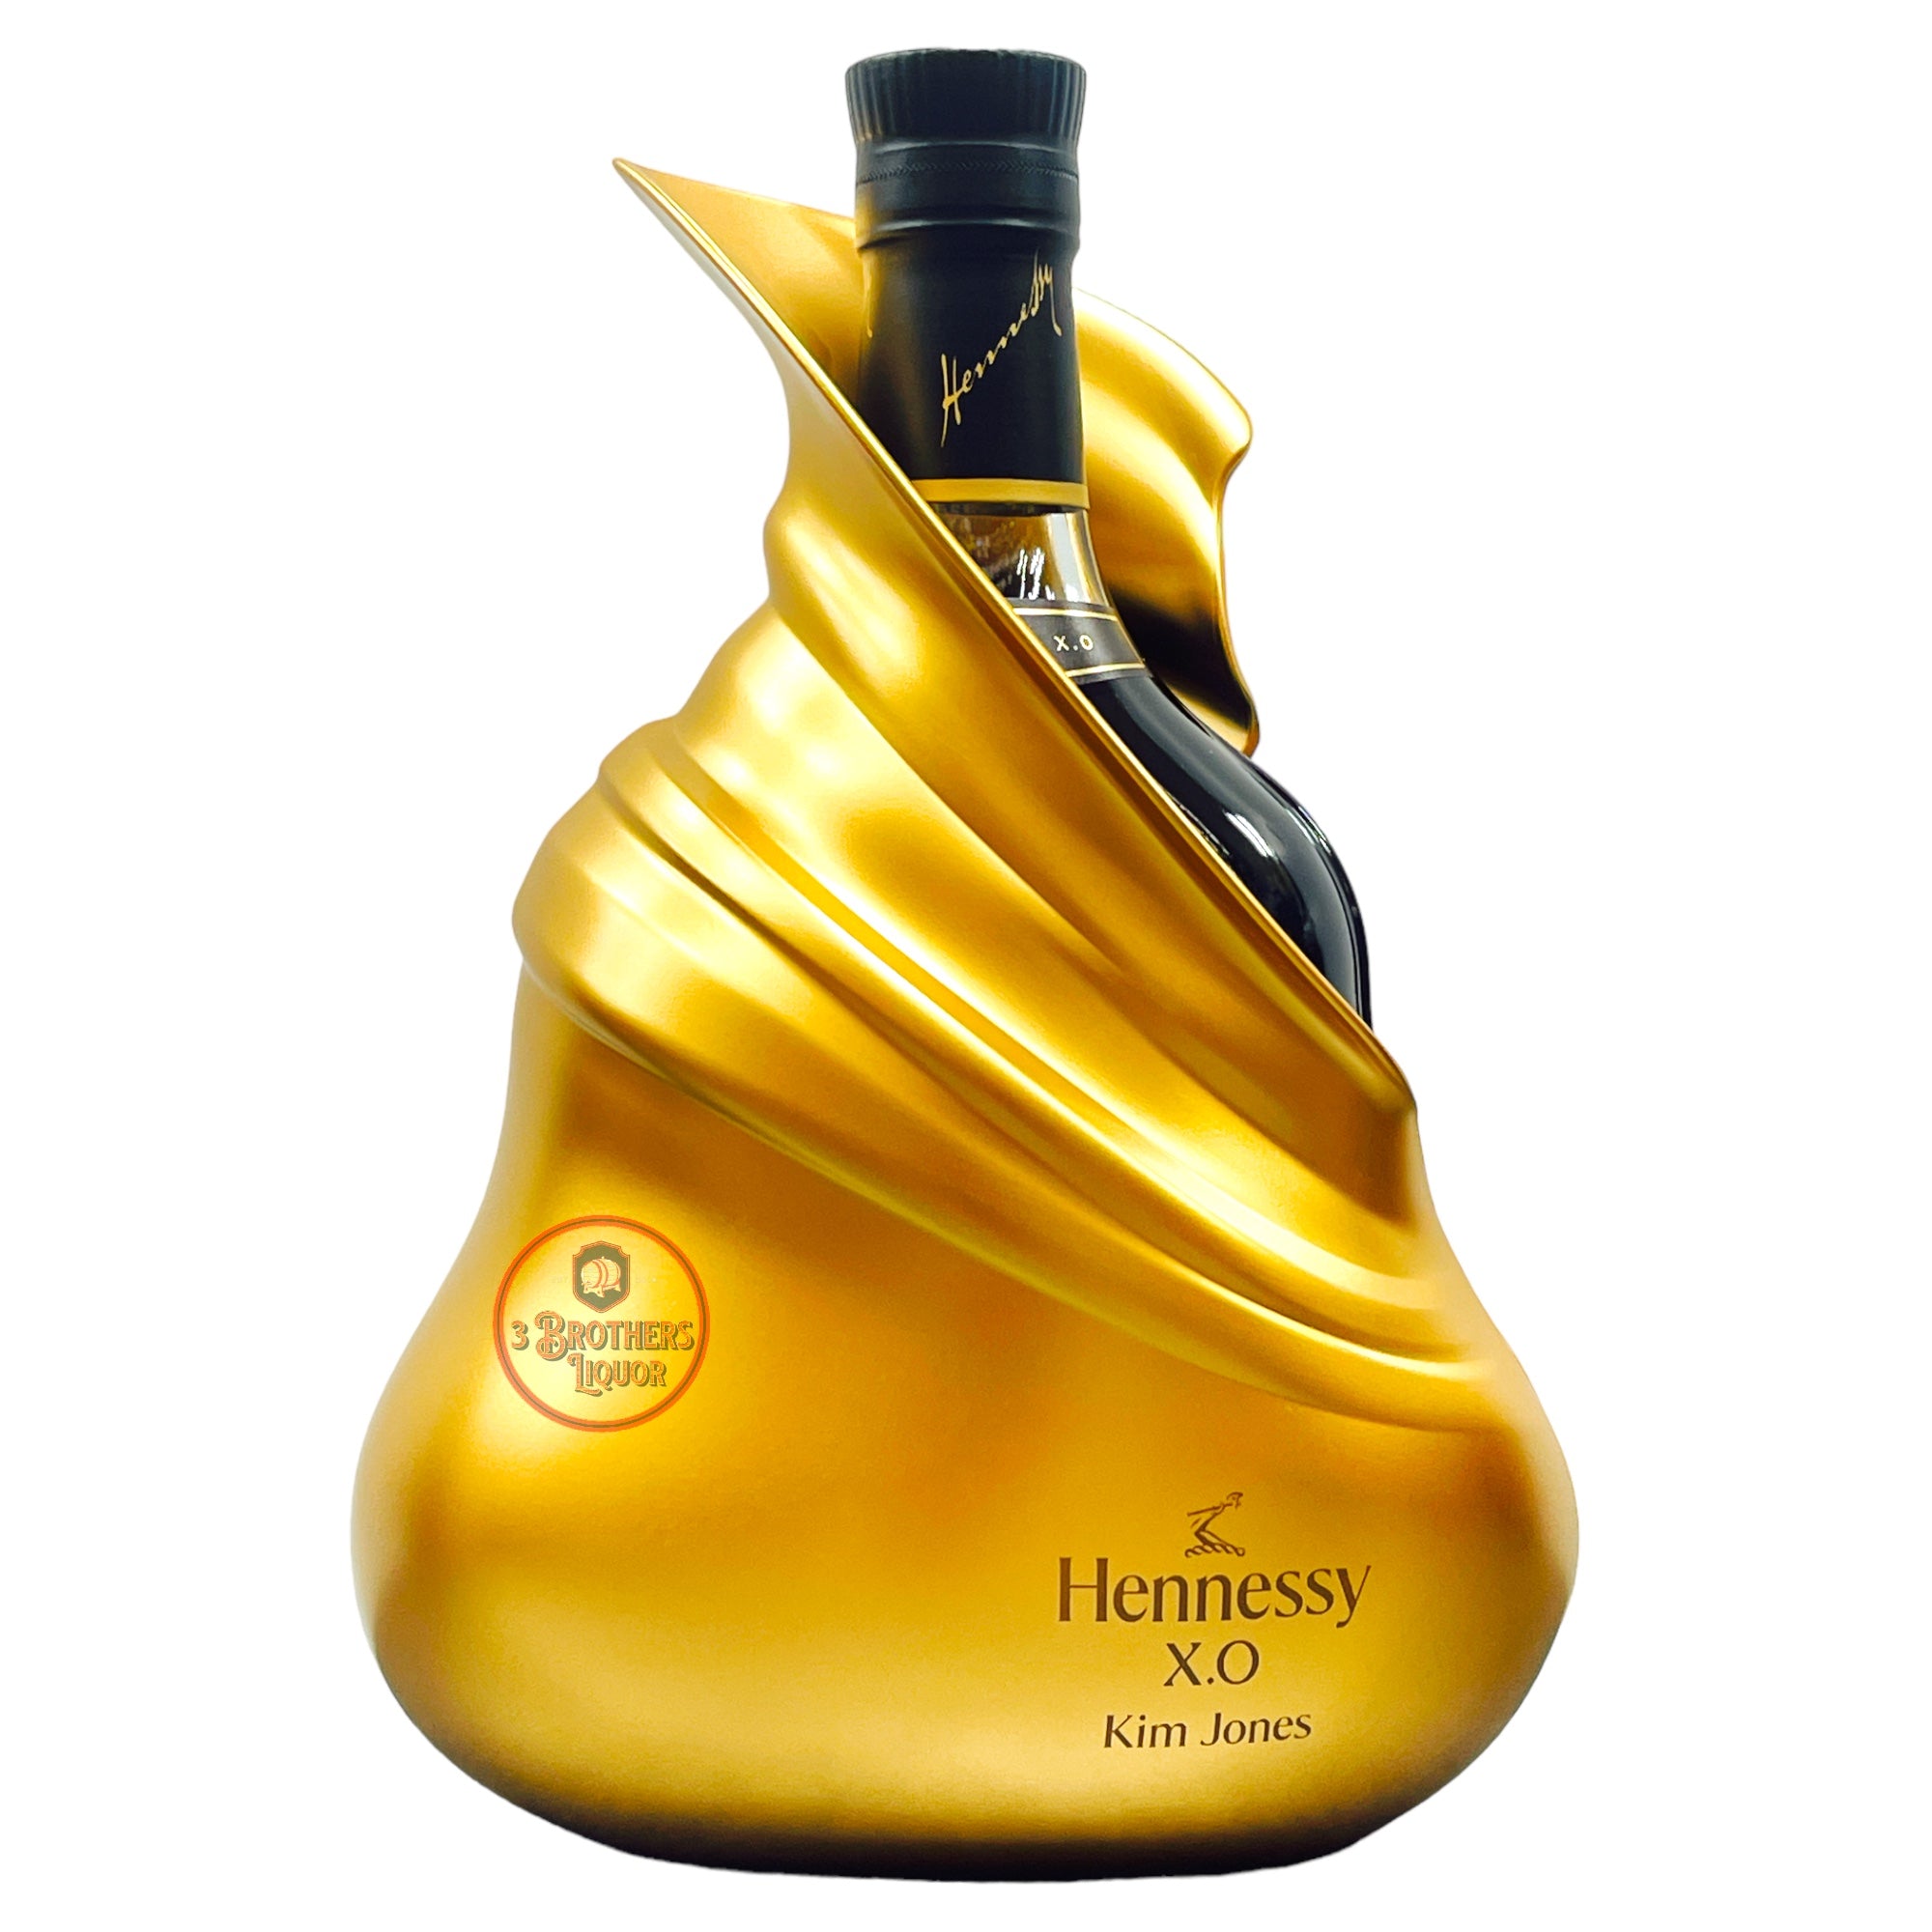 The Limited Edition Hennessy X.O, Kim Jones Bottle Is Now Available